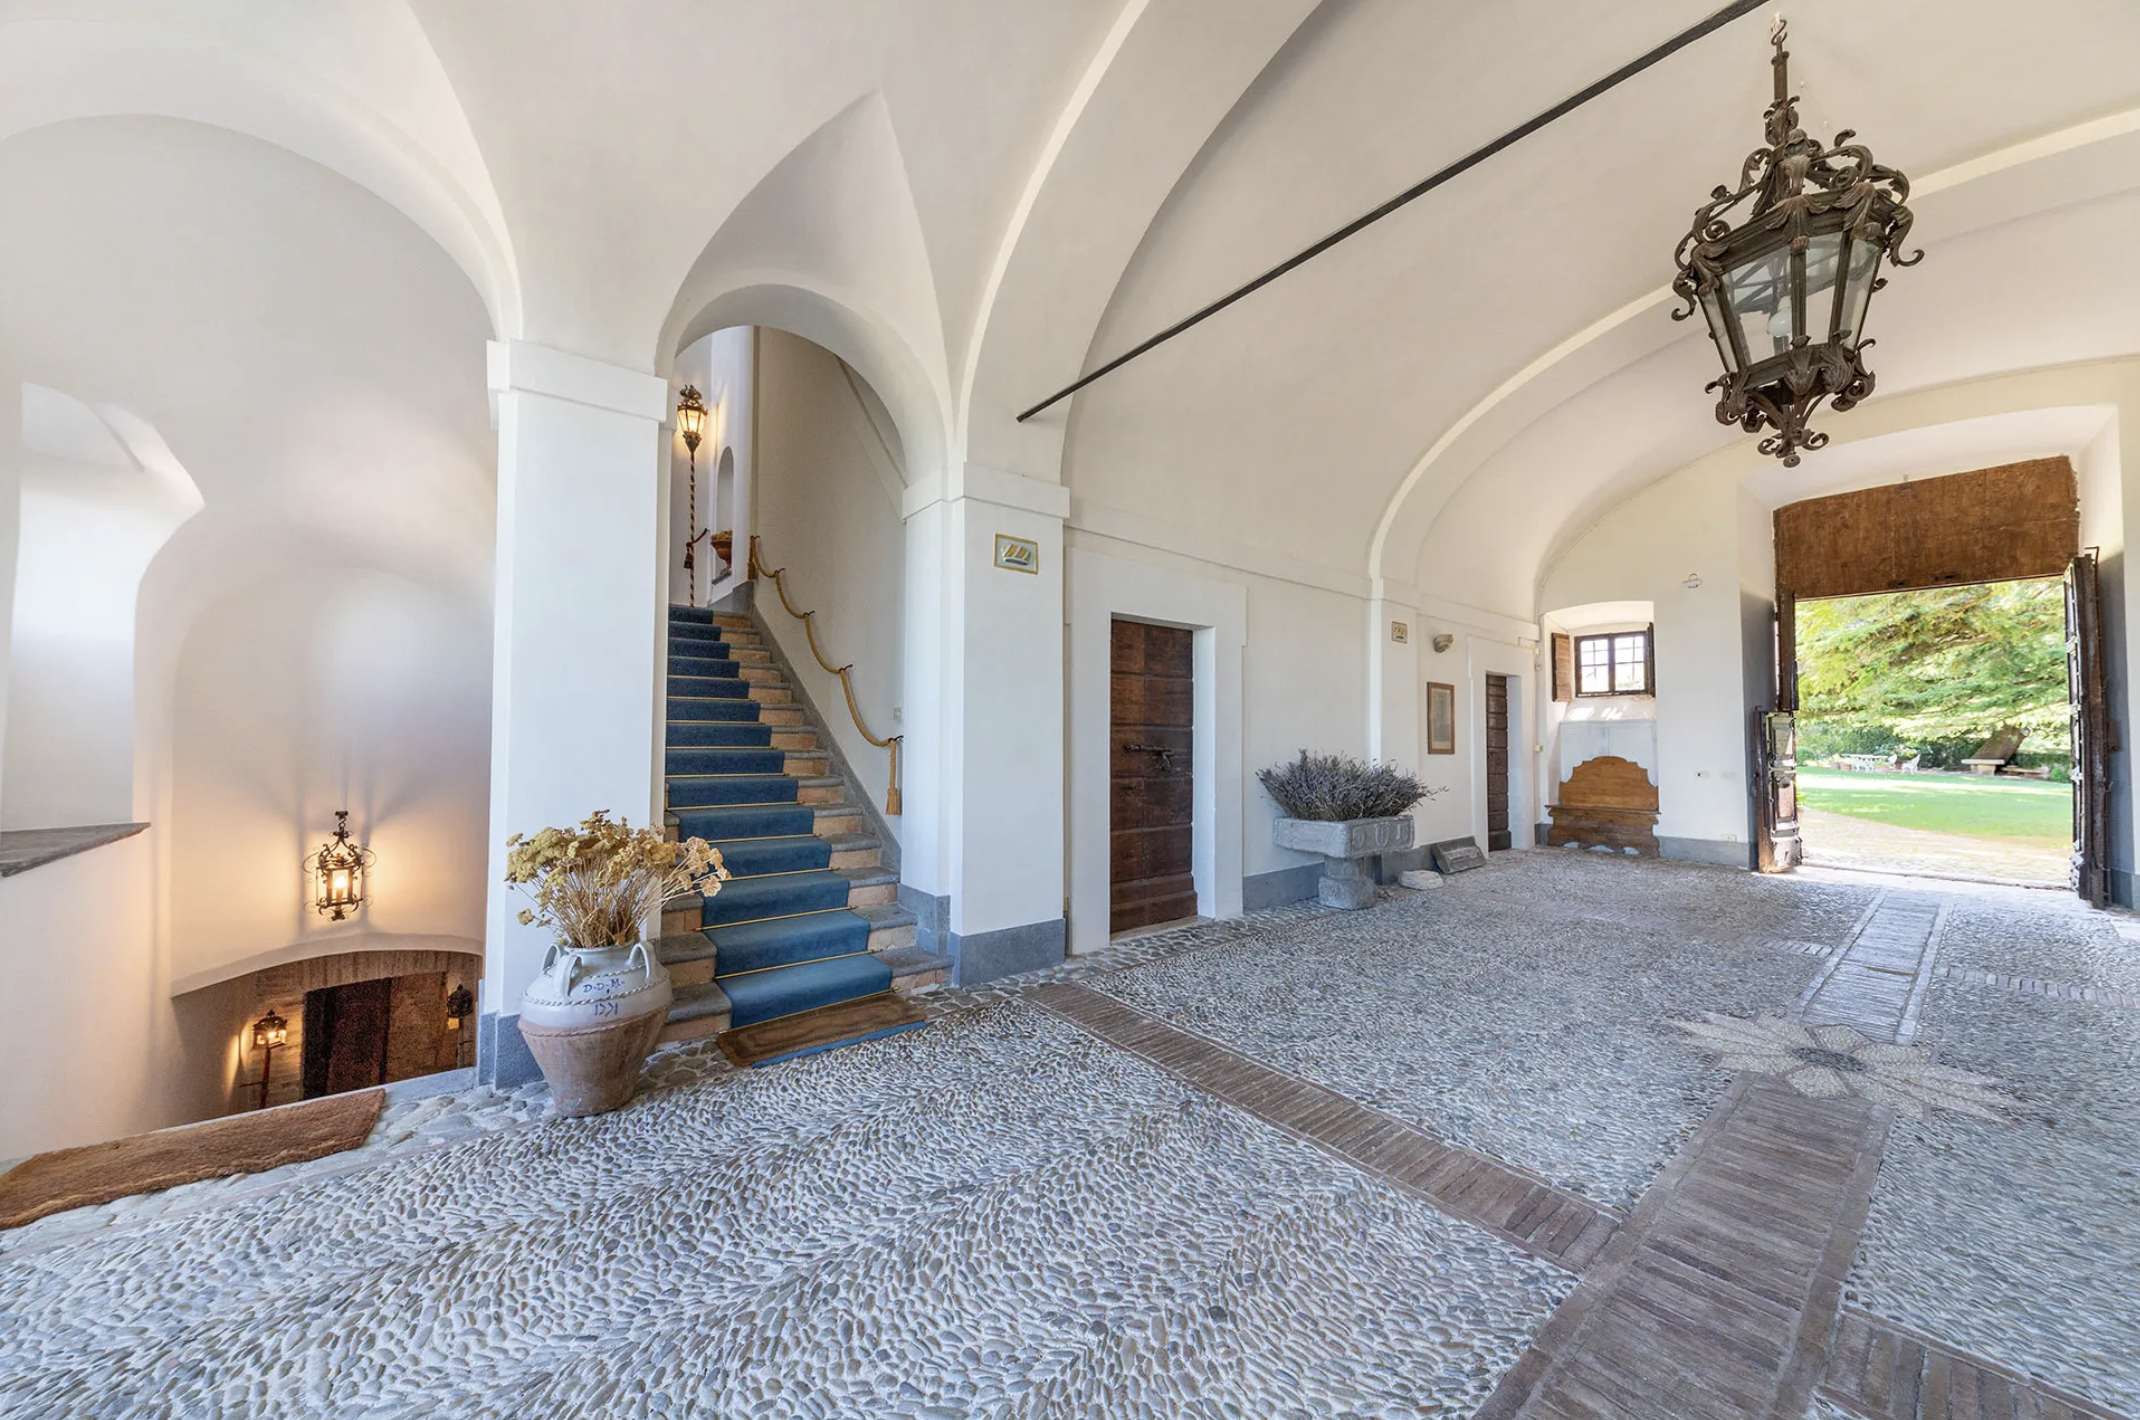 Francis York Historic Palazzo For Sale in Umbria, Italy Set in Private Park 13.png